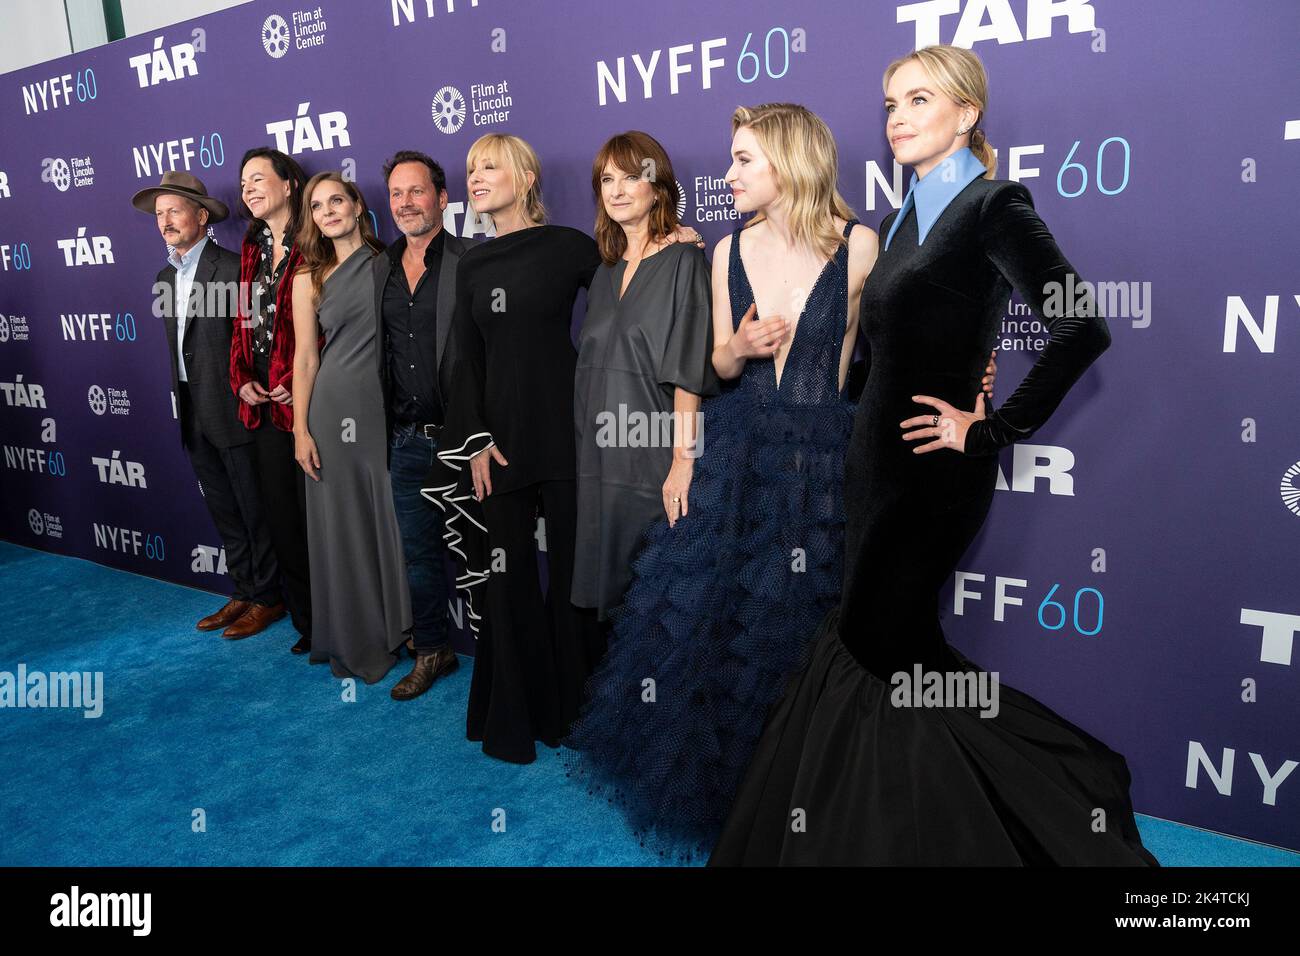 New York, United States. 03rd Oct, 2022. Todd Field, Monika Willi, Hildur Guðnadóttir, Marco Bittner Rosser, Cate Blanchett, Bina Daigeler, Sophie Kauer and Nina Hoss attend premiere of movie Tar during 60th New Yokr Film Festival at Alice Tully Hall (Photo by Lev Radin/Pacific Press) Credit: Pacific Press Media Production Corp./Alamy Live News Stock Photo